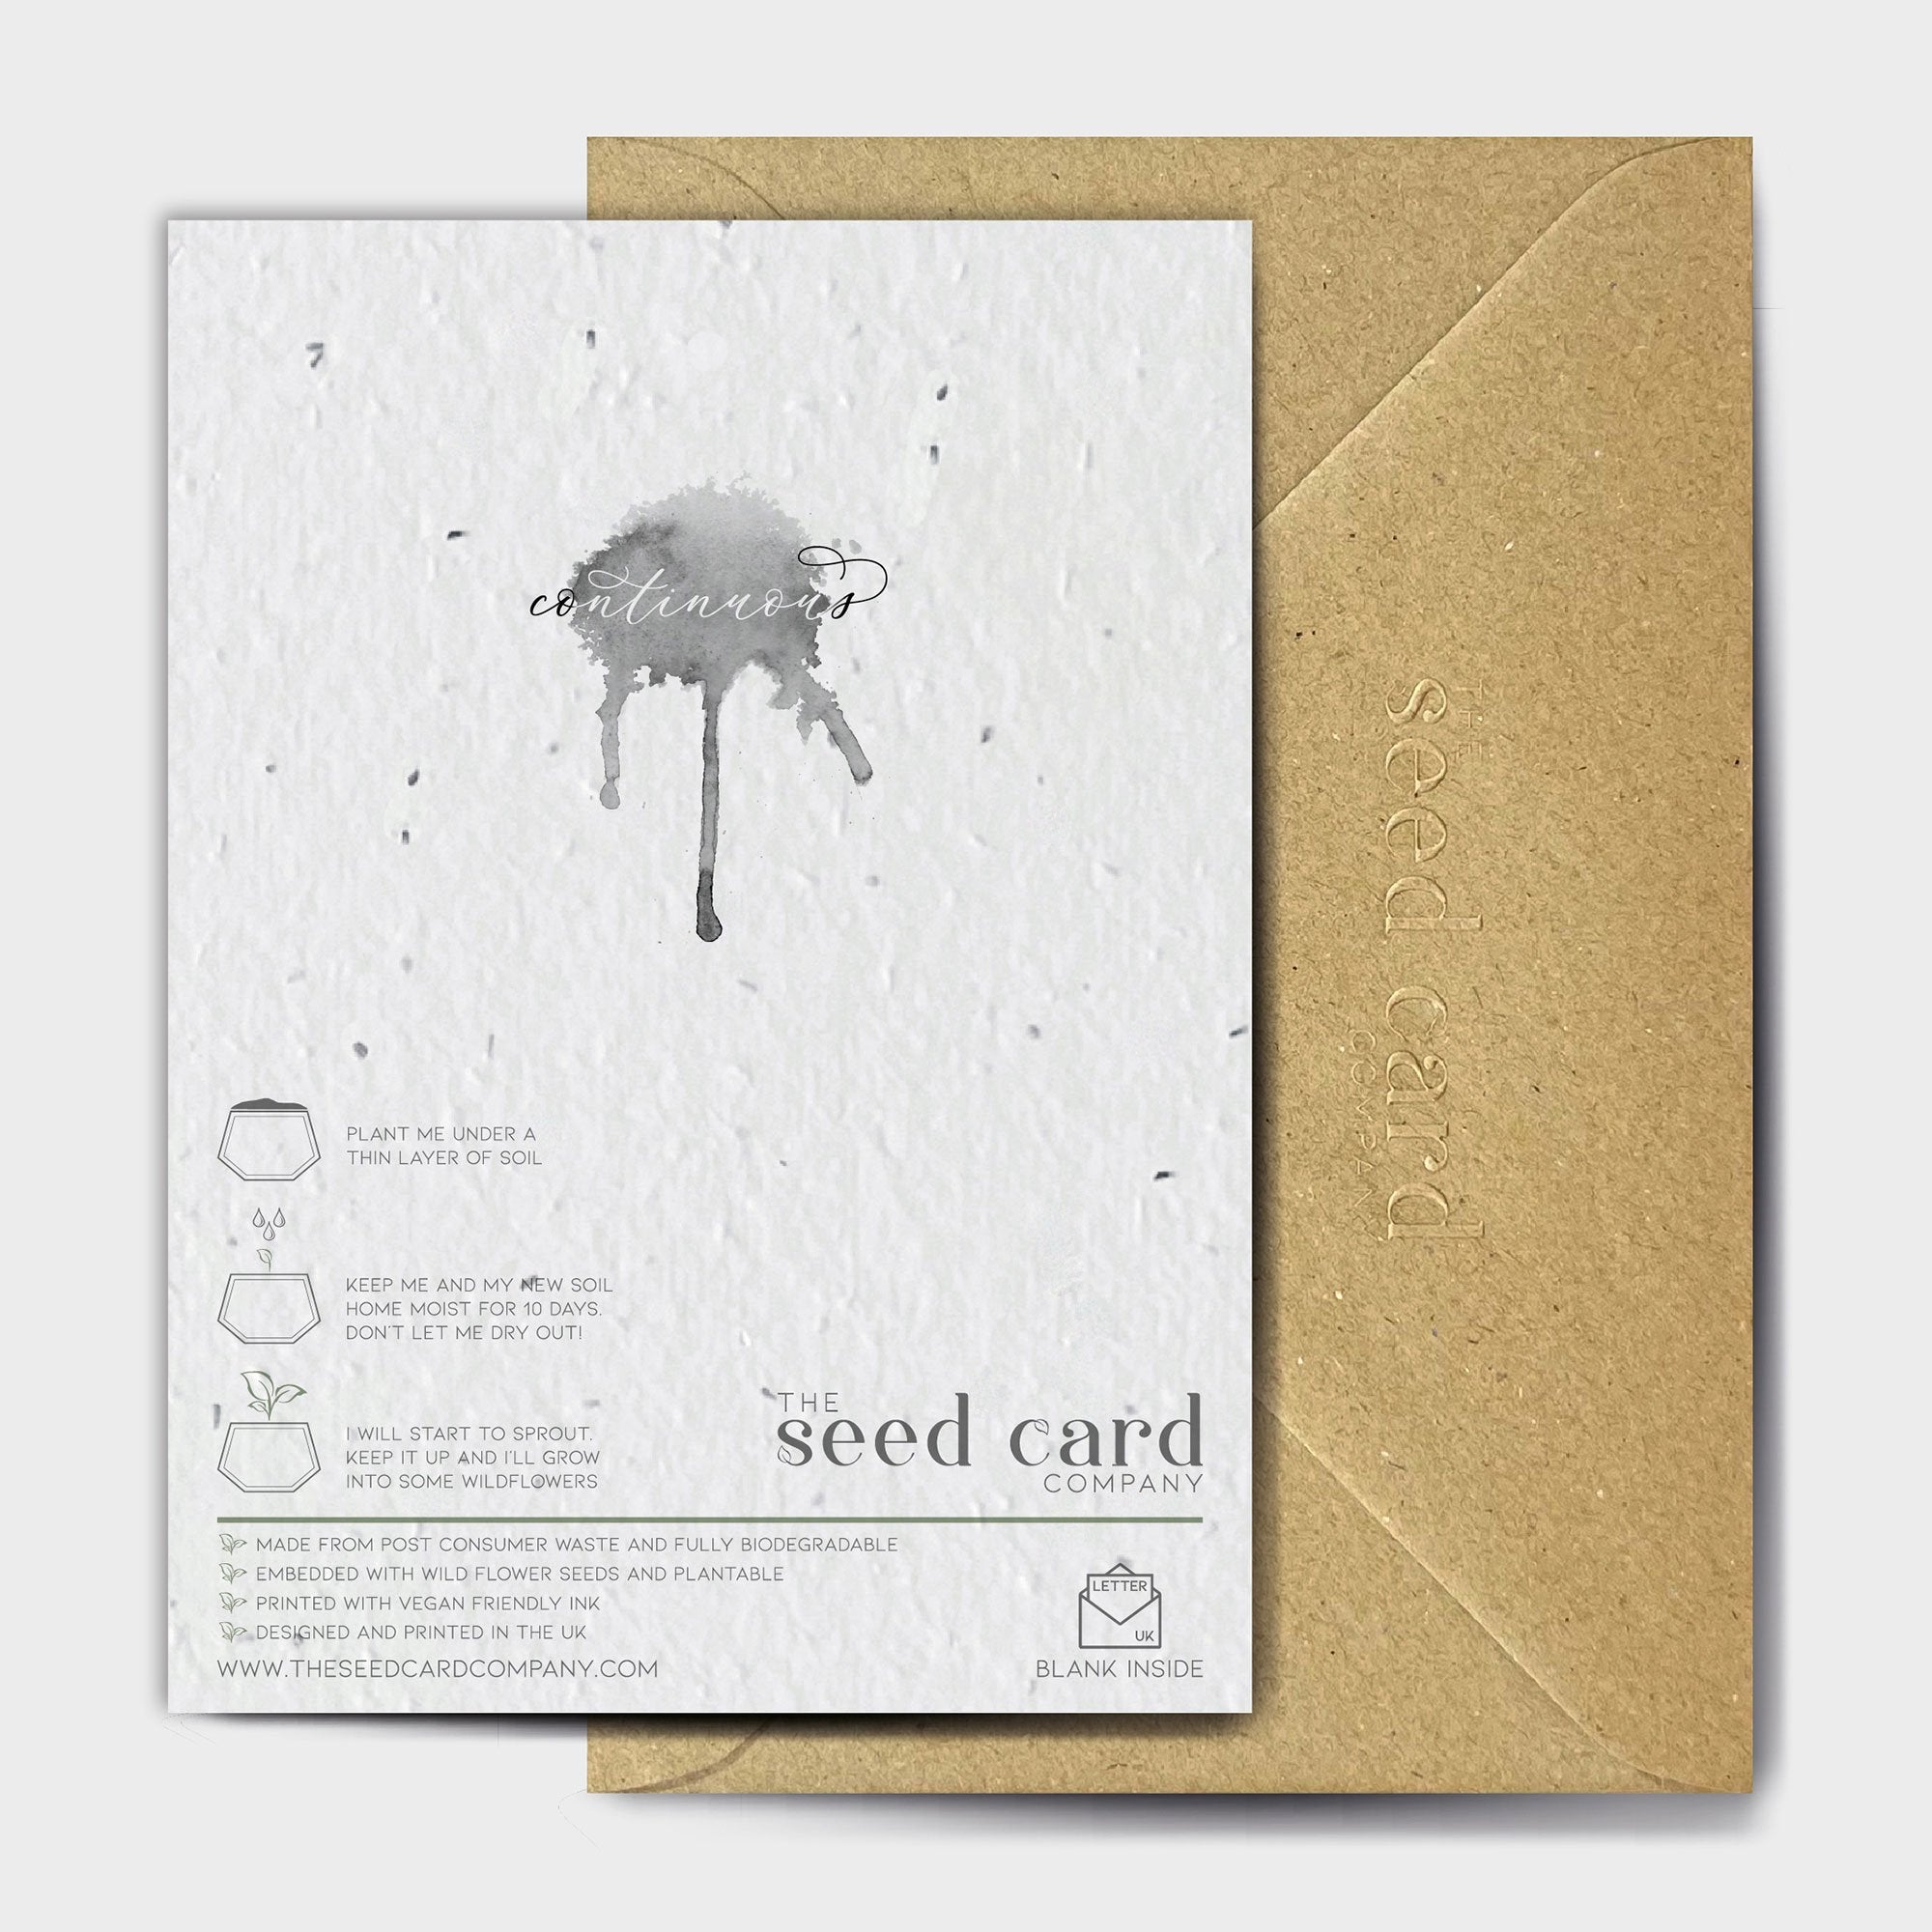 Shop online Blue Buggy - 100% biodegradable seed-embedded cards Shop -The Seed Card Company